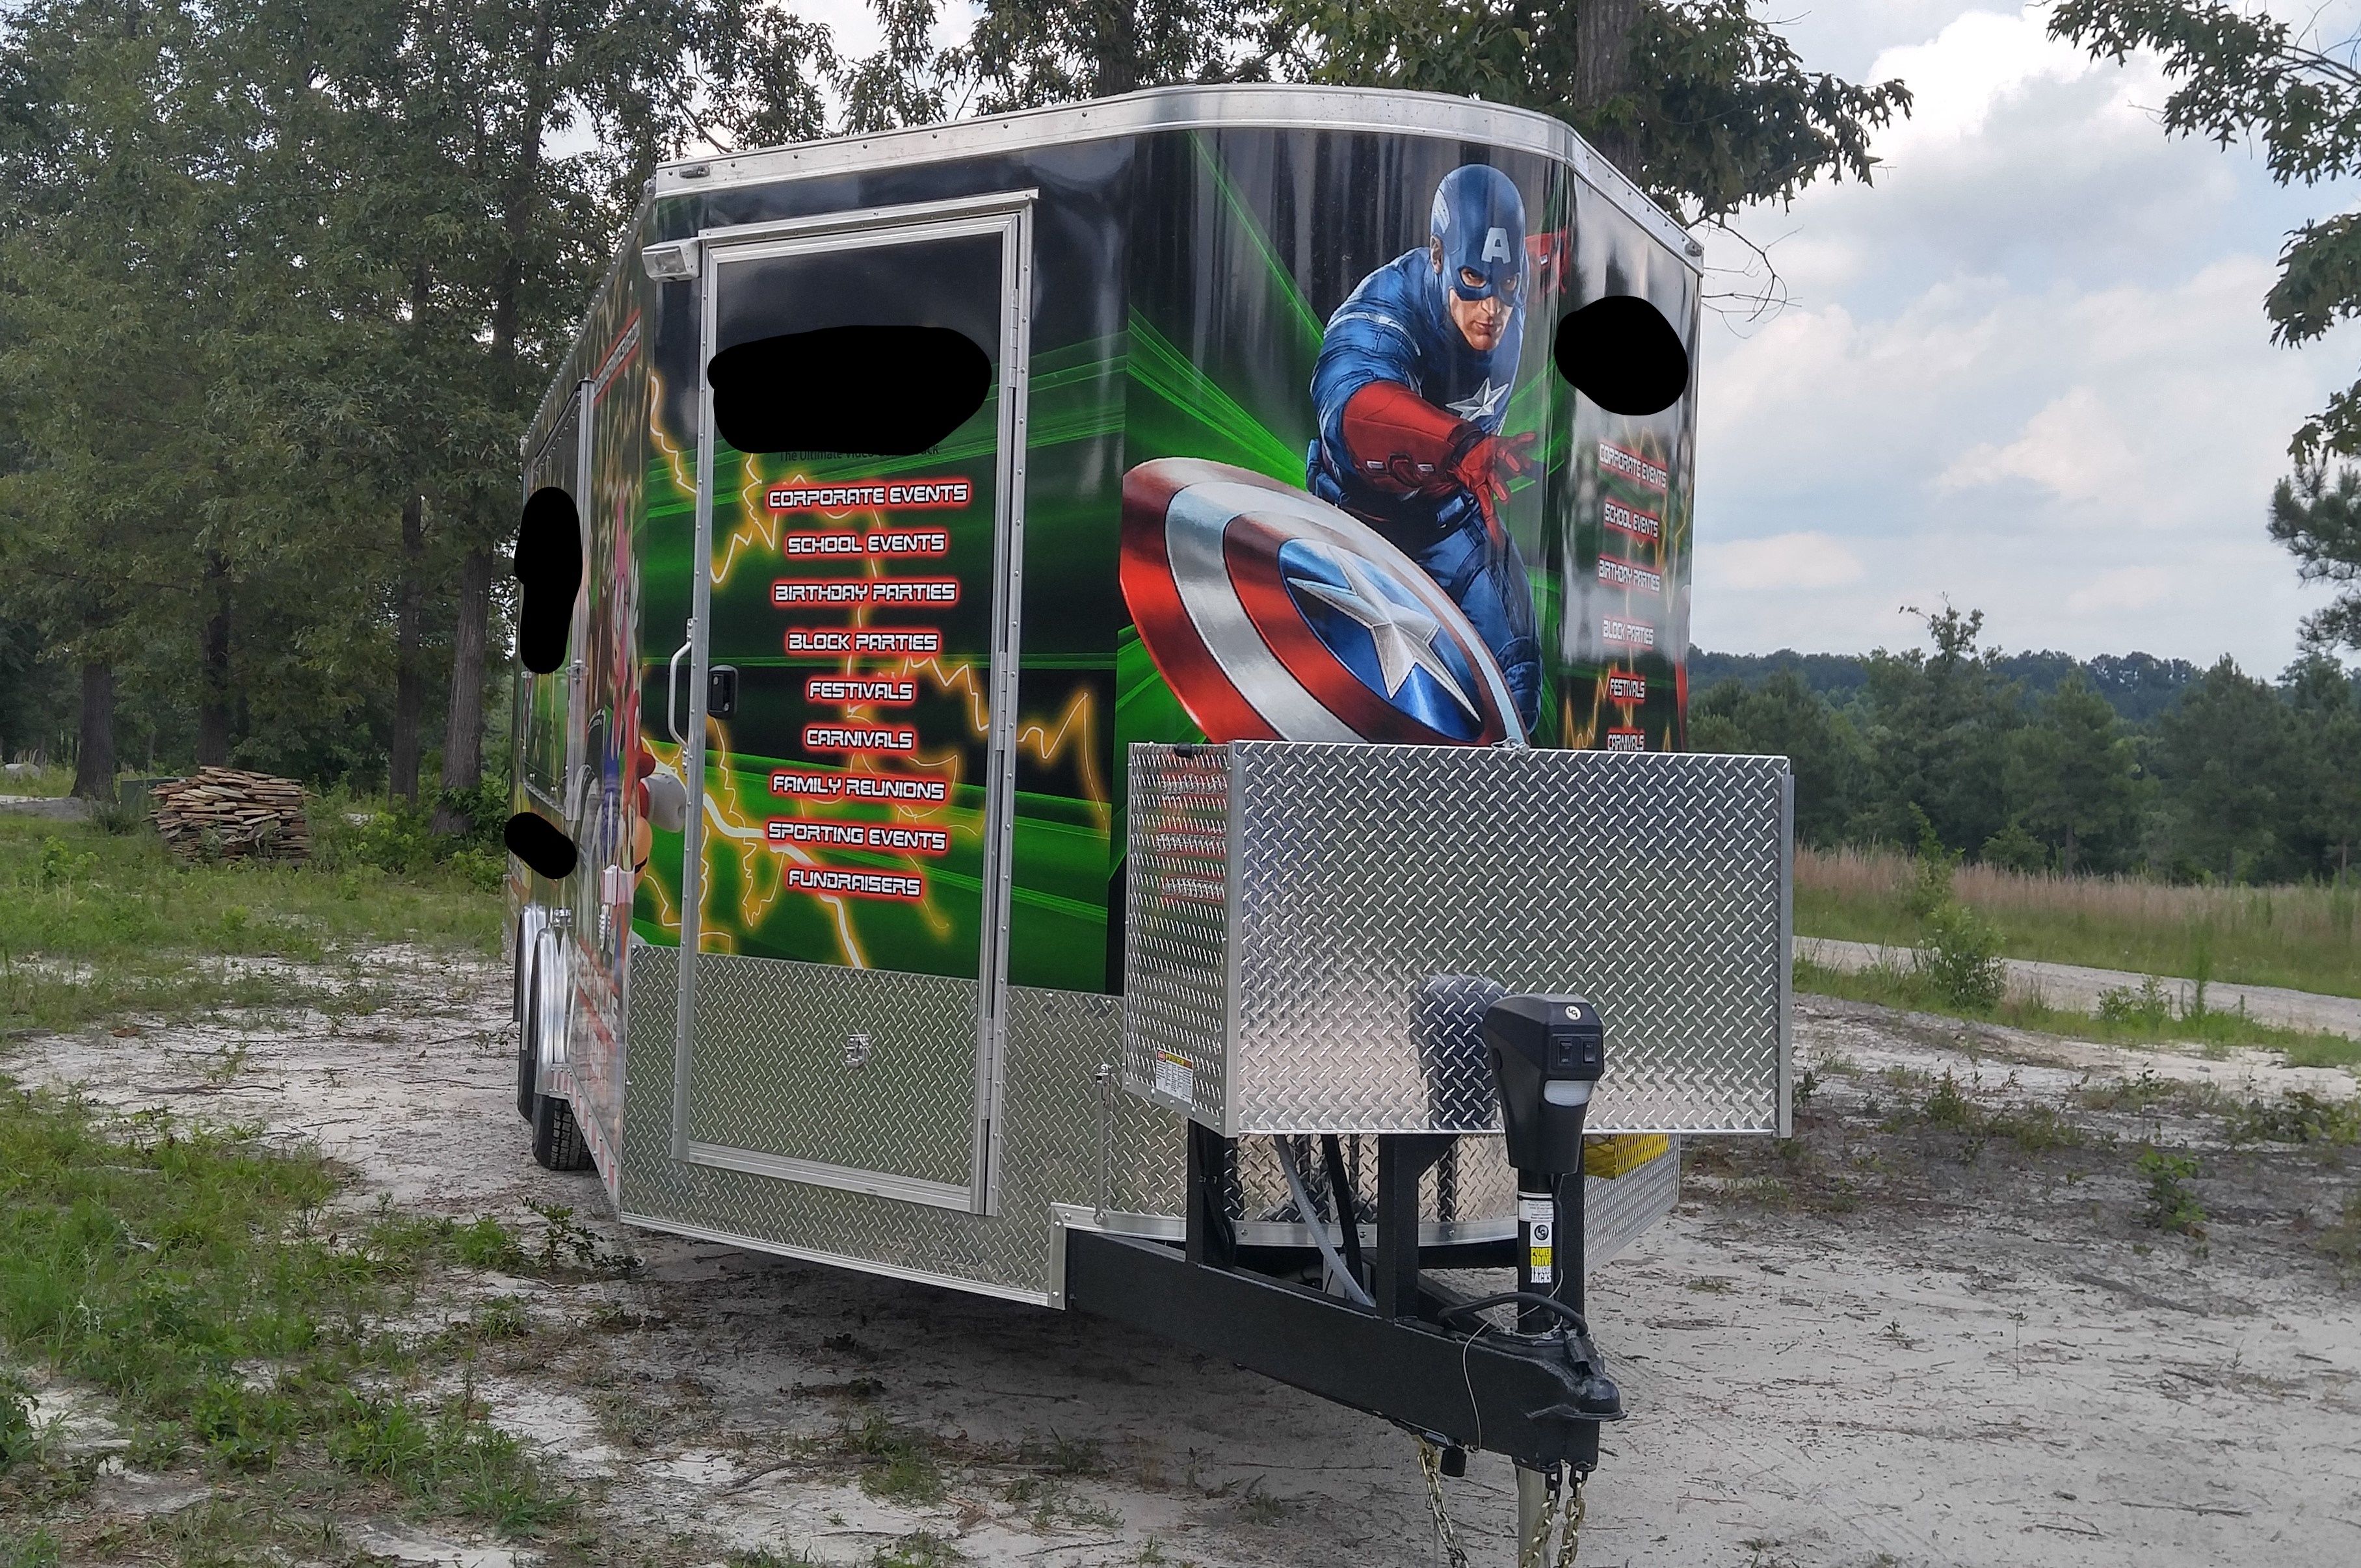 Buy a game  truck  pre owned mobile  game  theaters used 